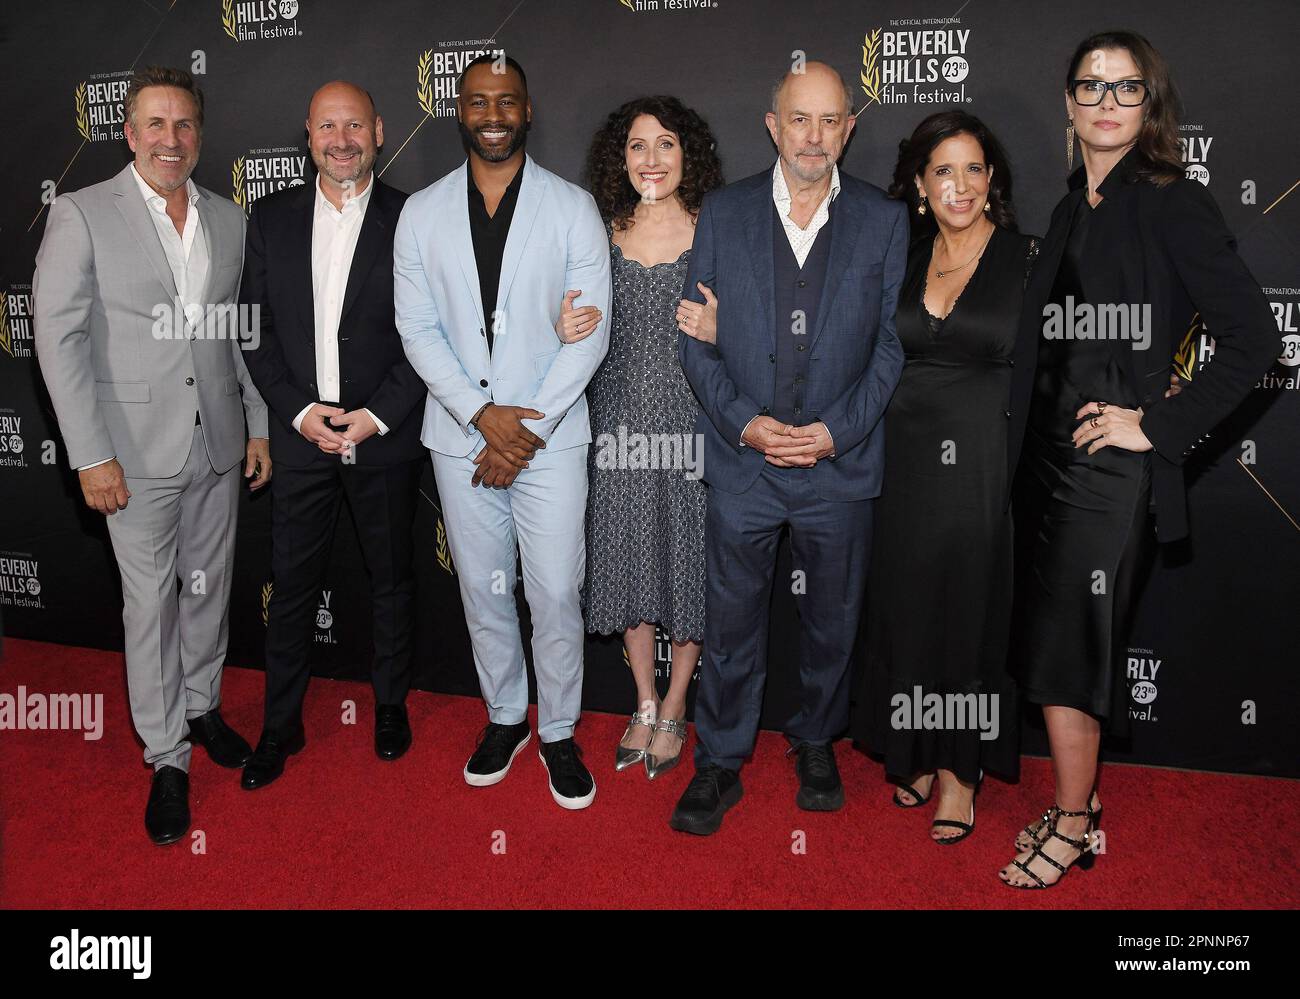 Los Angeles, USA. 19th Apr, 2023. (L-R) SWIPE NYC Cast & Crew - David Kelsey, Steven Paul, Justin Marcel McManus, Lisa Edelstein, Richard Schiff, Sue Zarco Kramer and Bridget Moynahan at The 23rd Annual International Beverly Hills Film Festival - Opening Night held at the TCL Chinese 6 Theatres in Hollywood, CA on Wednesday, ?April 19, 2023. (Photo By Sthanlee B. Mirador/Sipa USA) Credit: Sipa USA/Alamy Live News Stock Photo